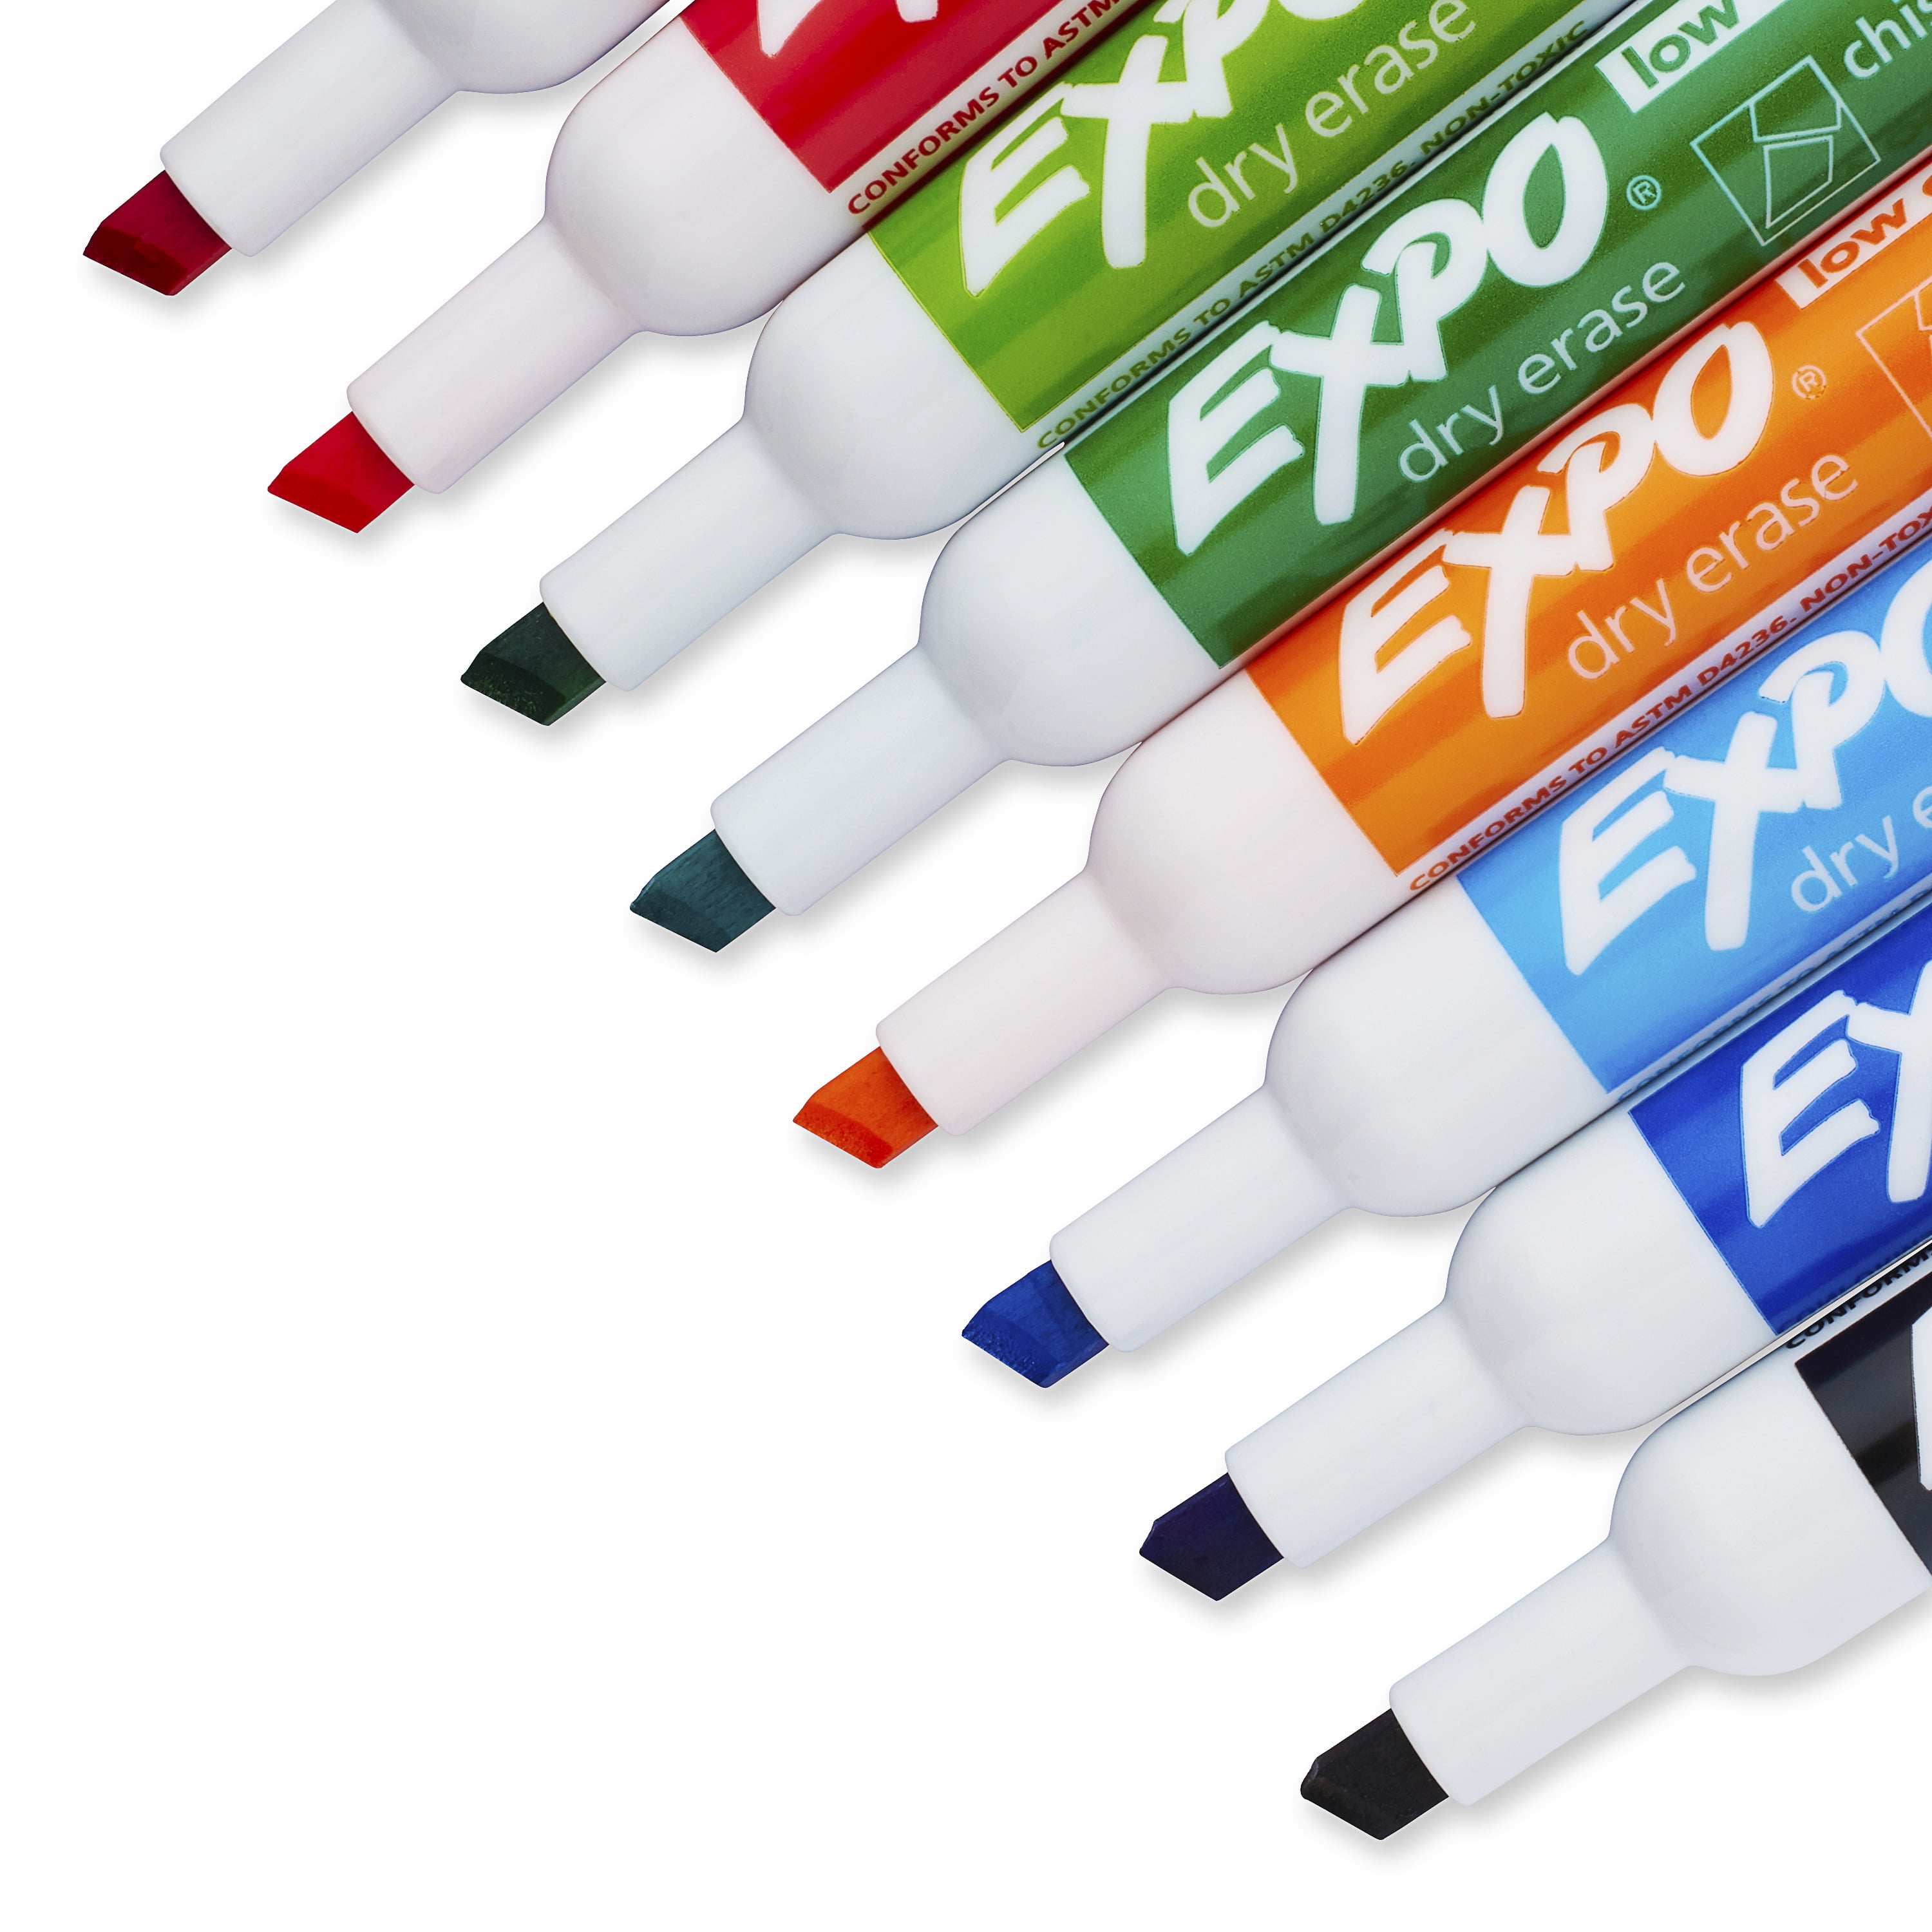 Expo Dry Erase Markers, Fine Point, Intense Colors - 8 pack